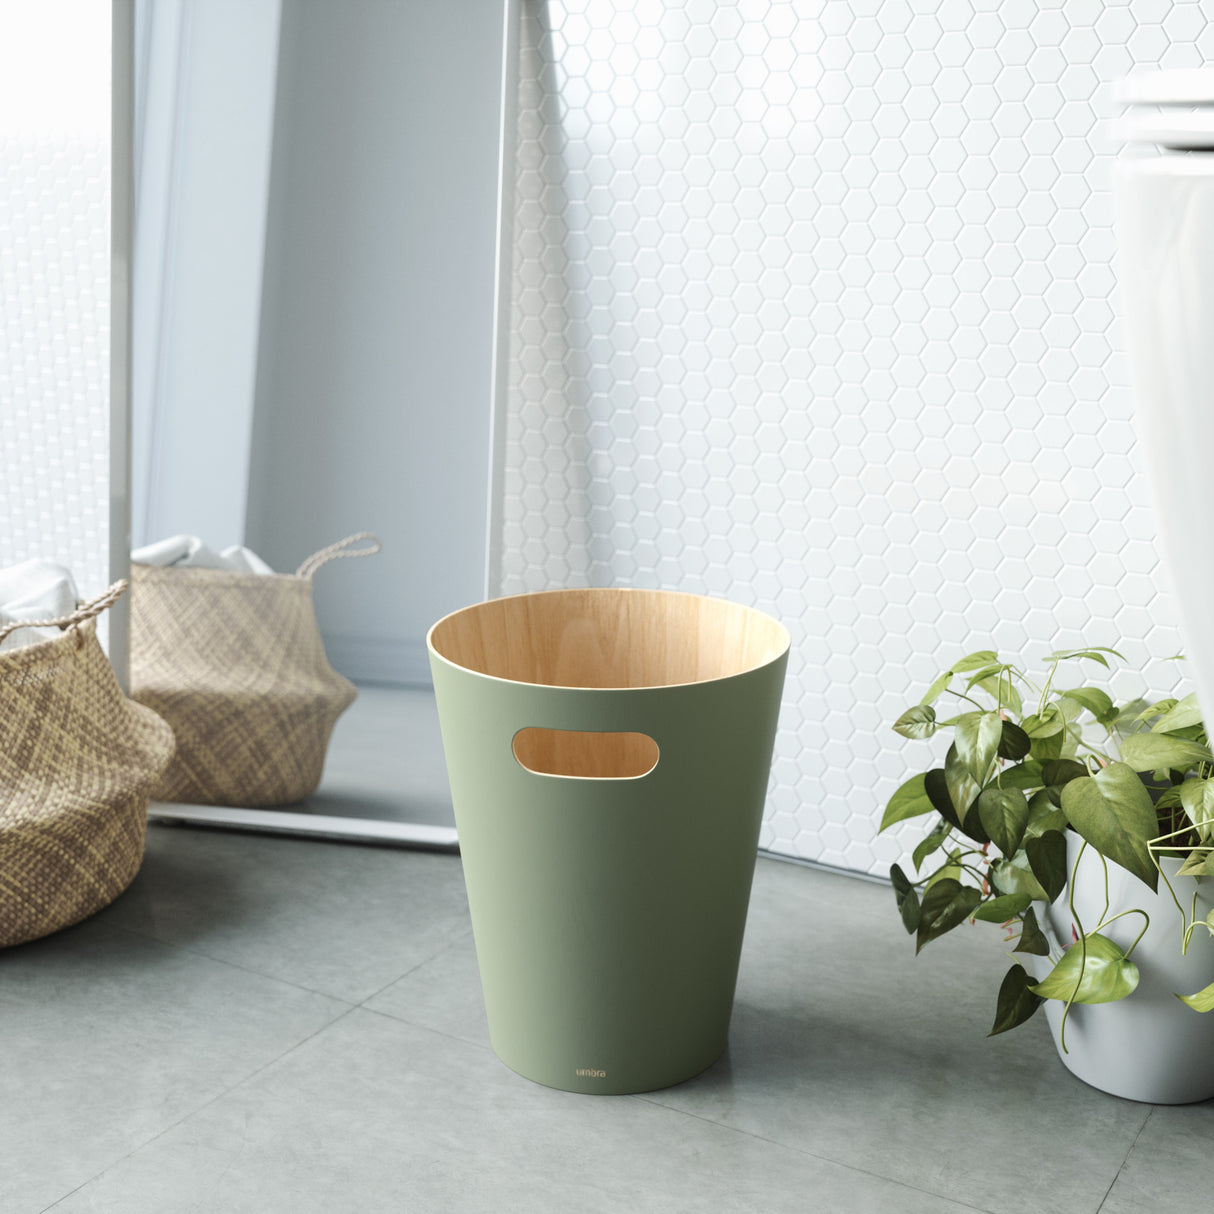 Bathroom Trash Cans | color: Spruce | Hover